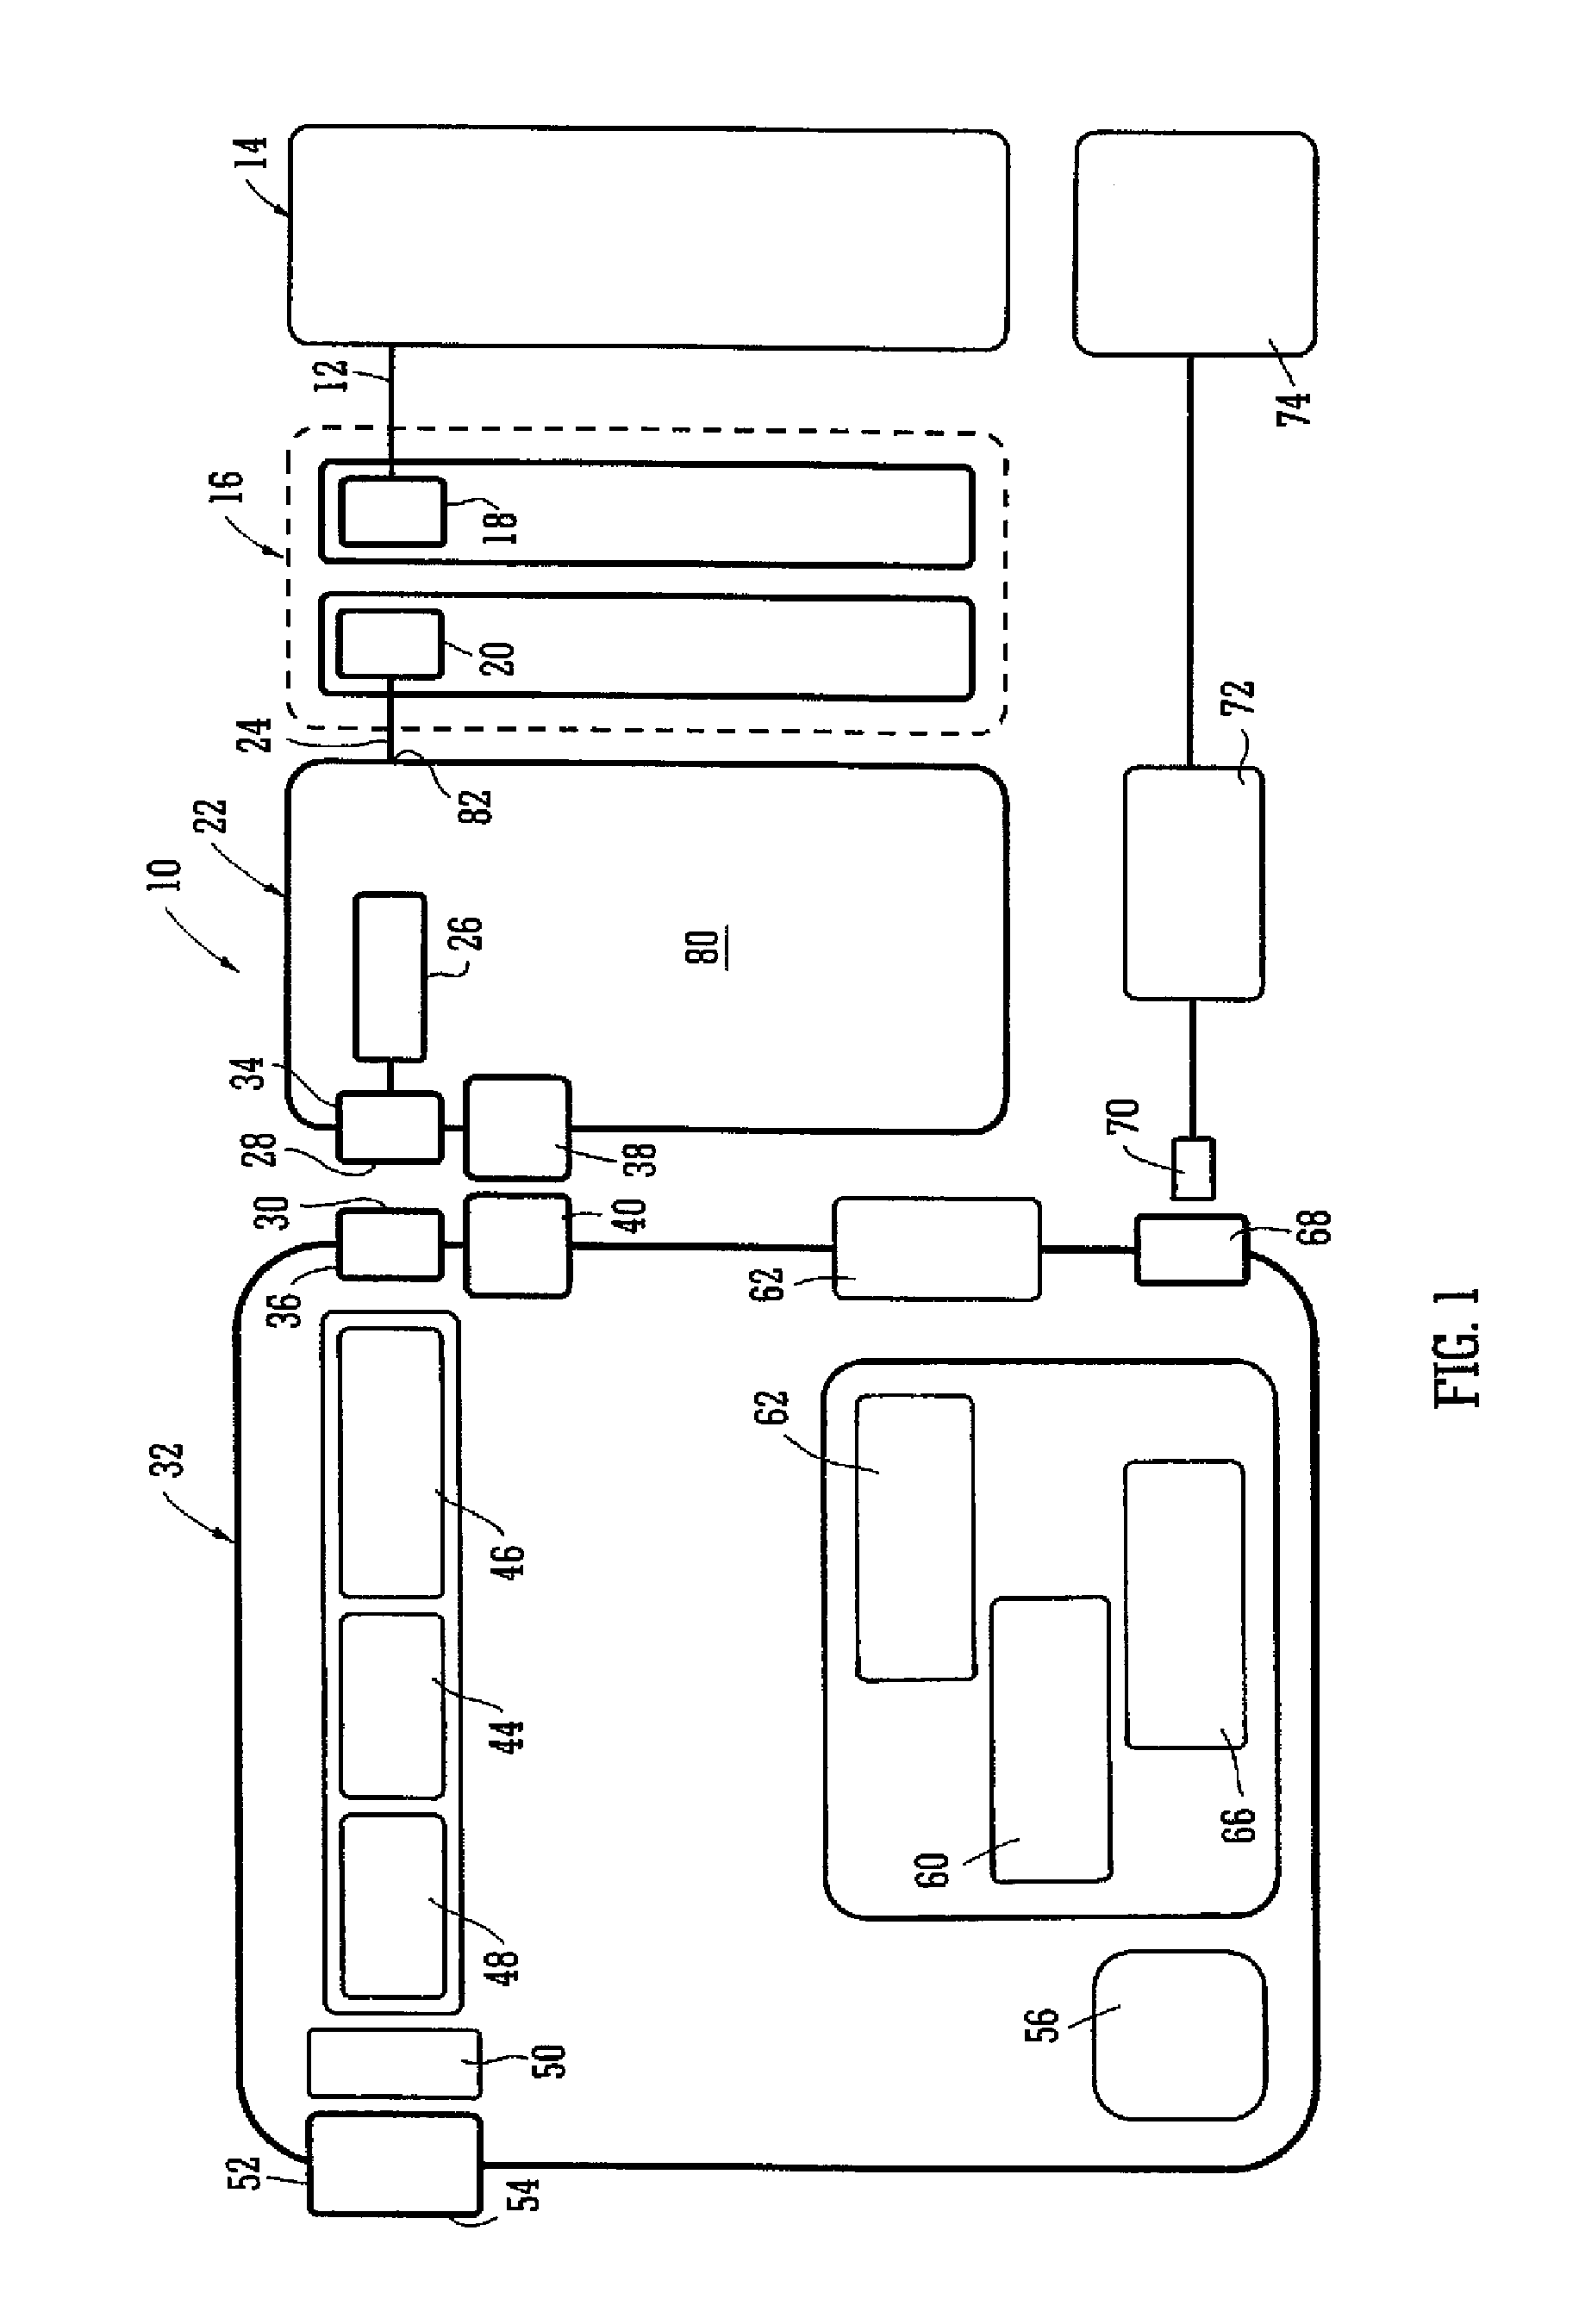 Apparatus and method for applying topical negative pressure